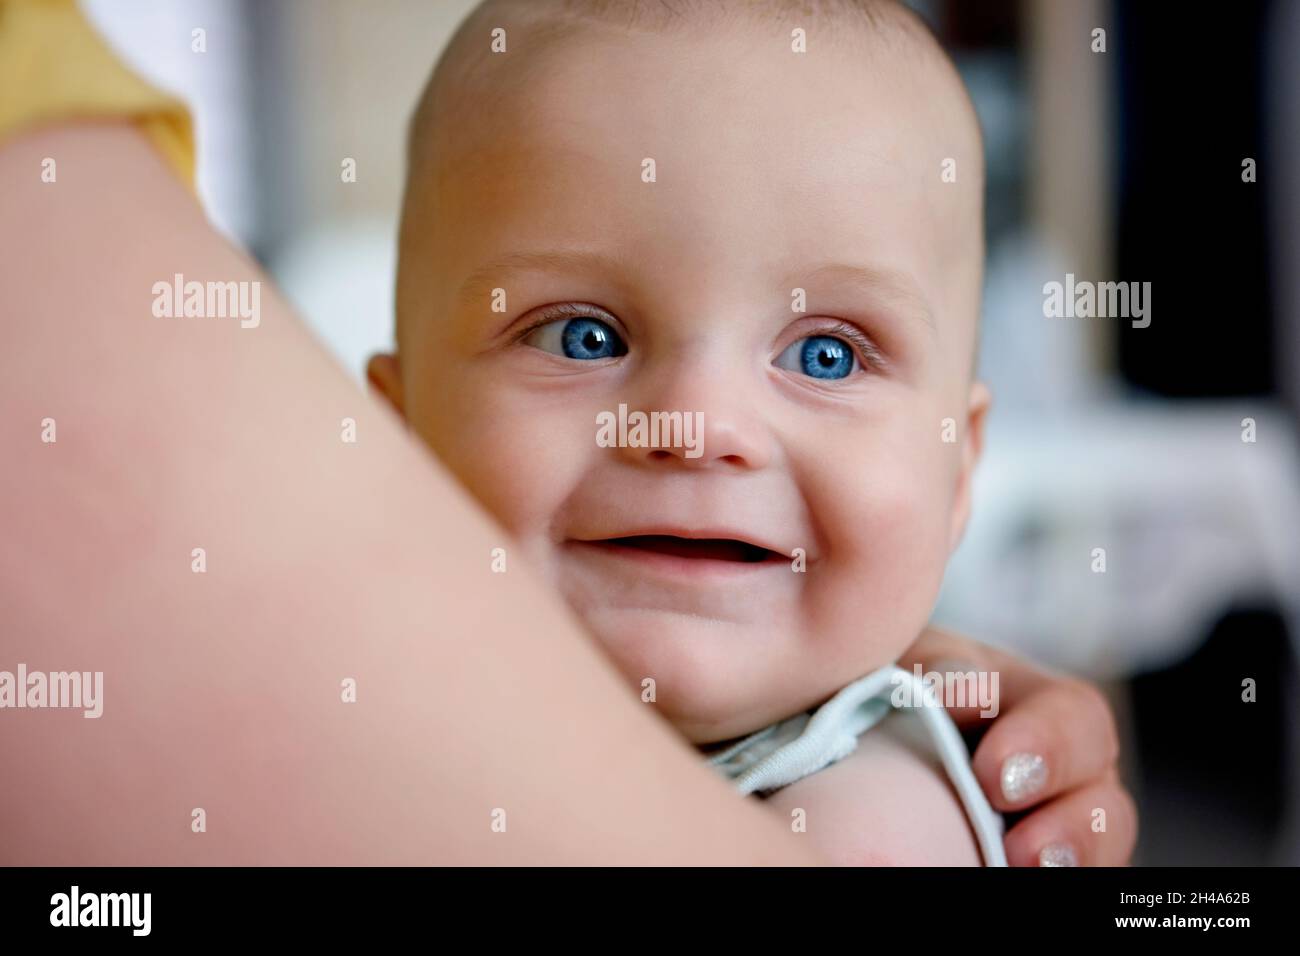 portrait of a cute smiling baby with blue eyes looking away Stock Photo